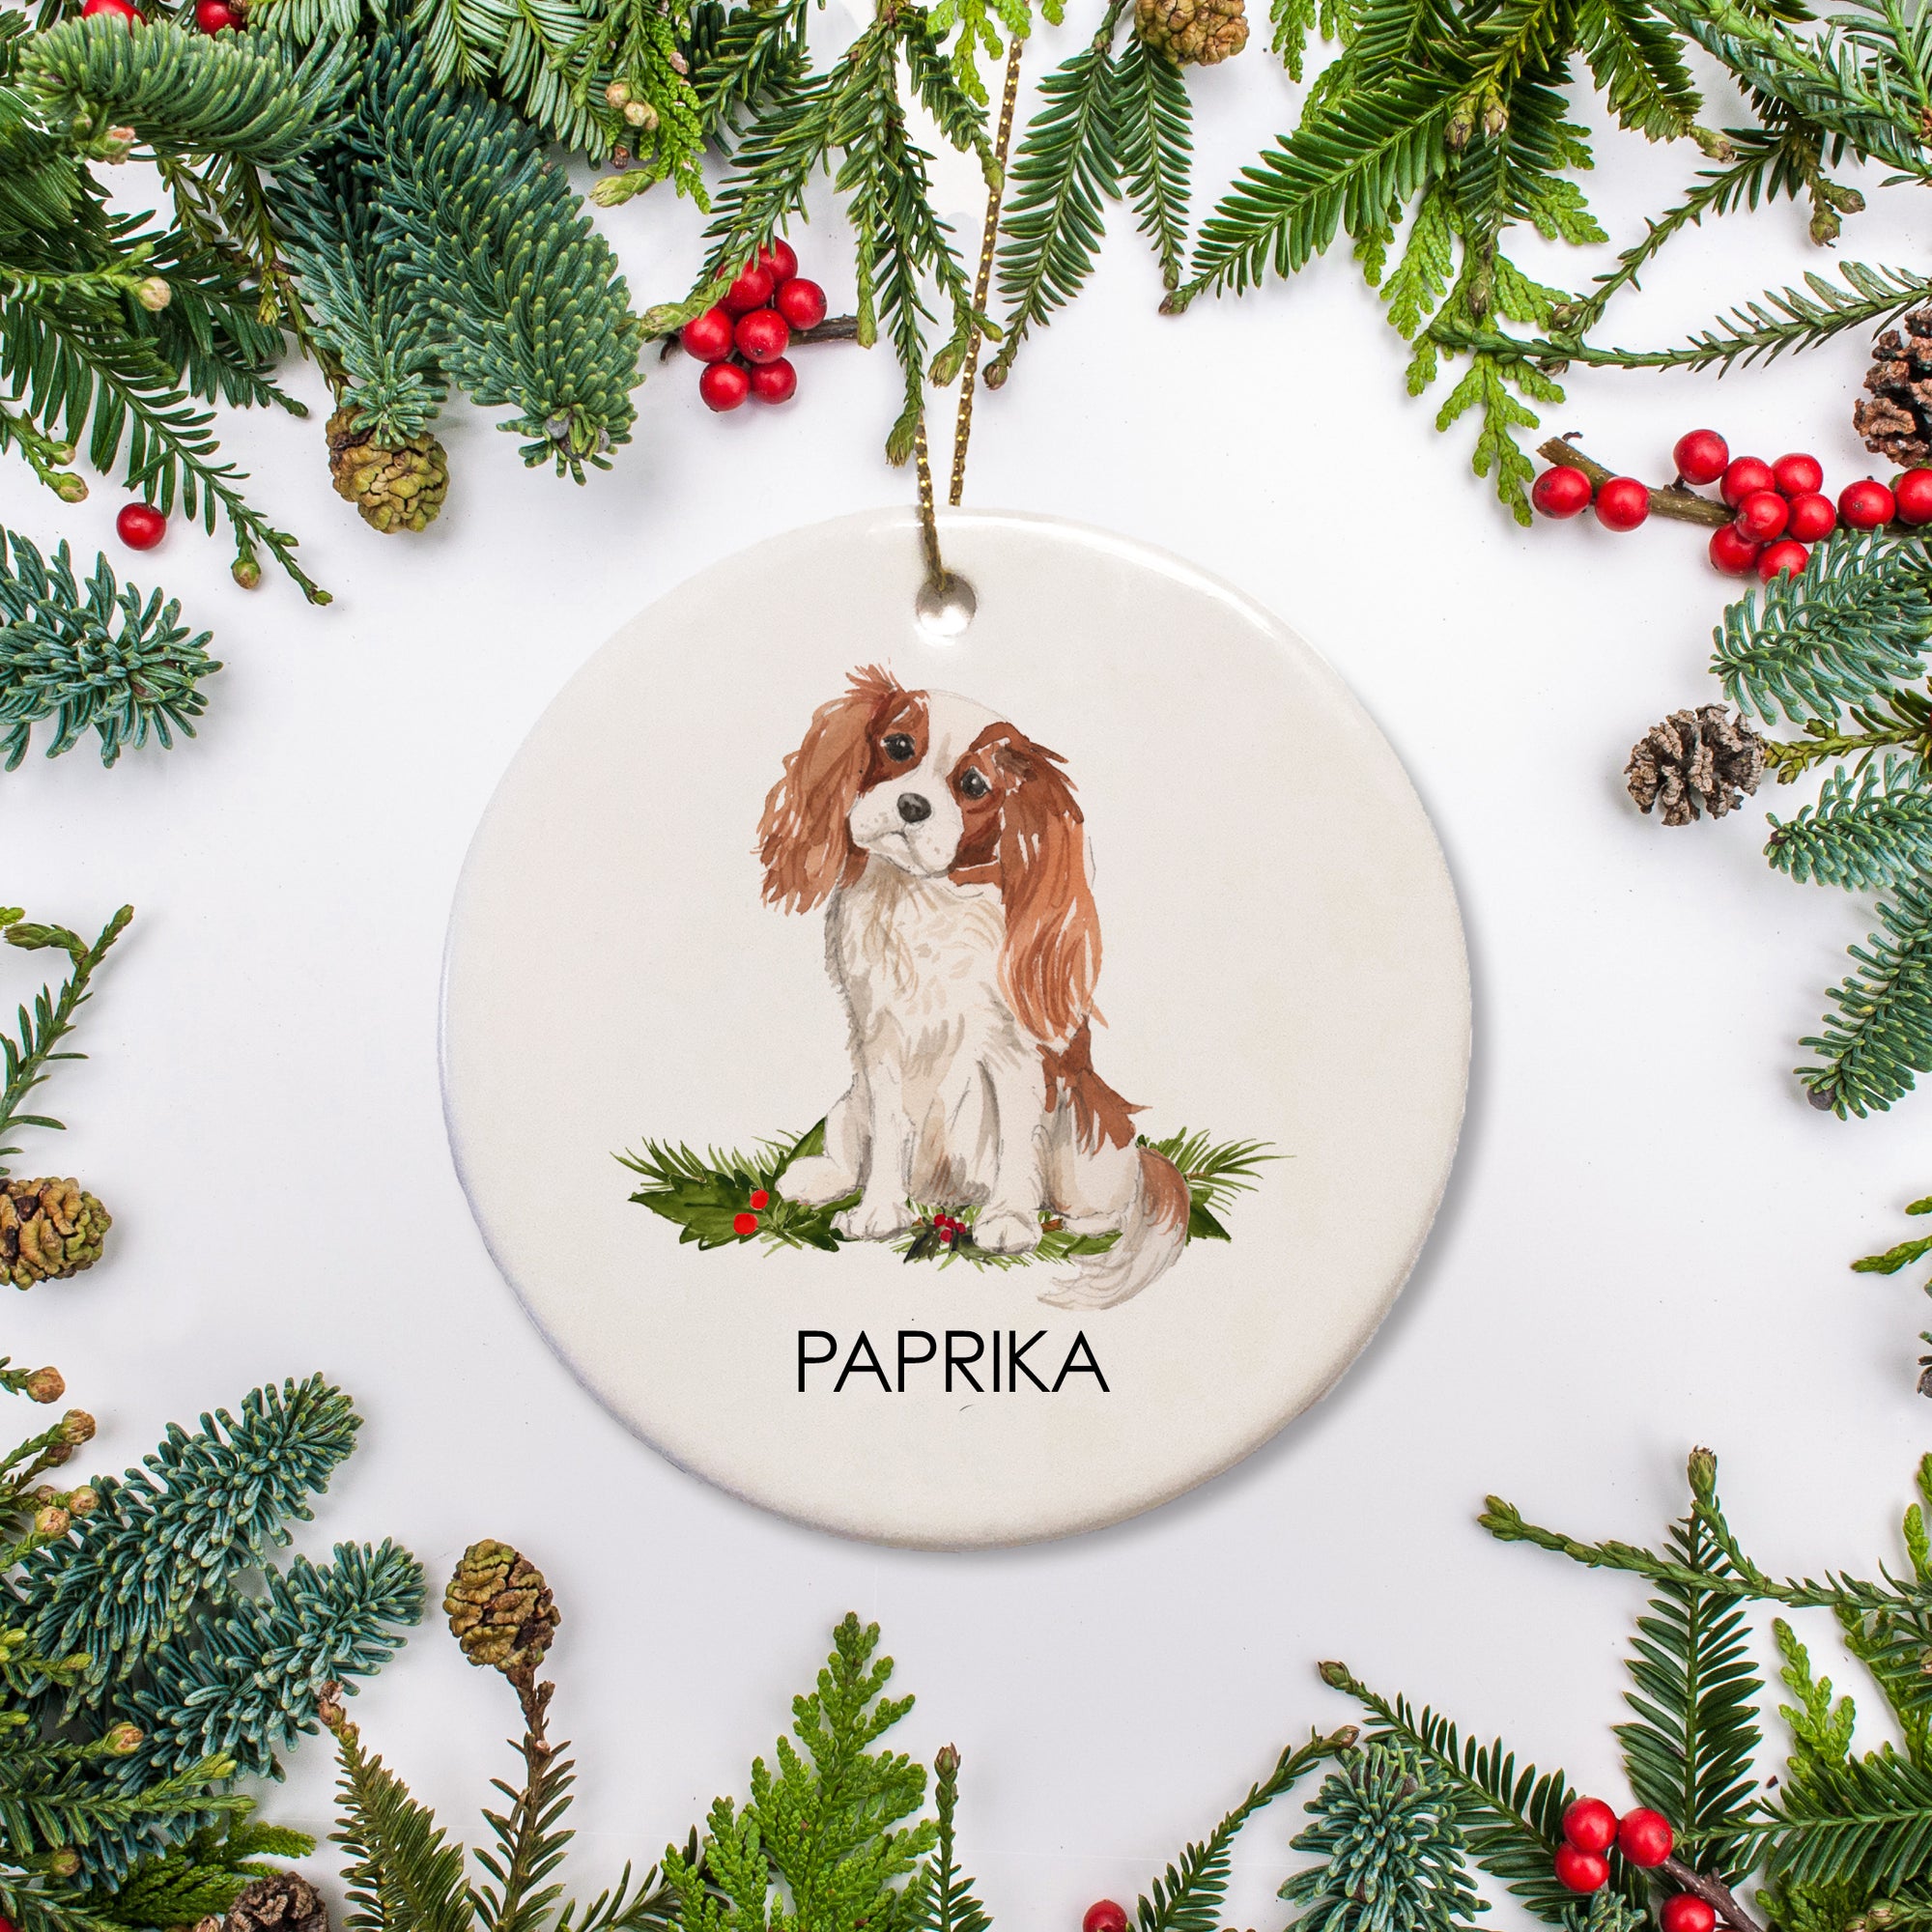 This custom ornament boasts your precious <strong></strong>Blenheim Cavalier King Charles dog, along with their name. It's a thoughtful gift for any pet enthusiast or way to celebrate your fur baby's first Christmas.